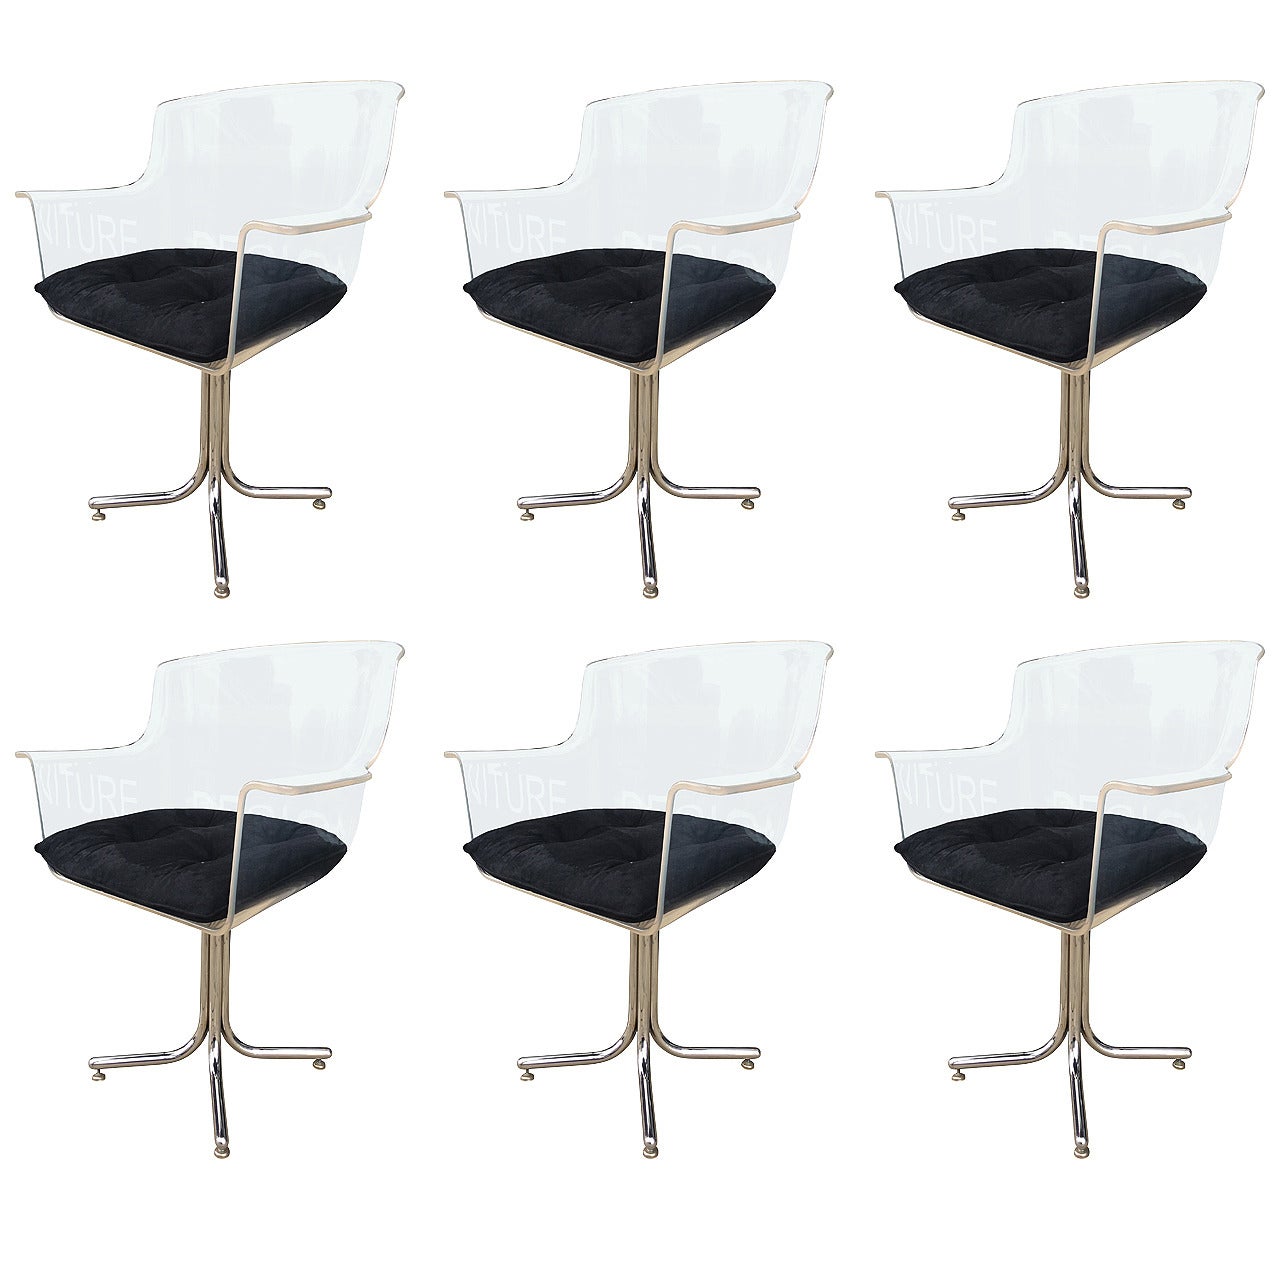 Set of Six Lucite and Chrome Chairs by Leon Rosen for Pace Collection